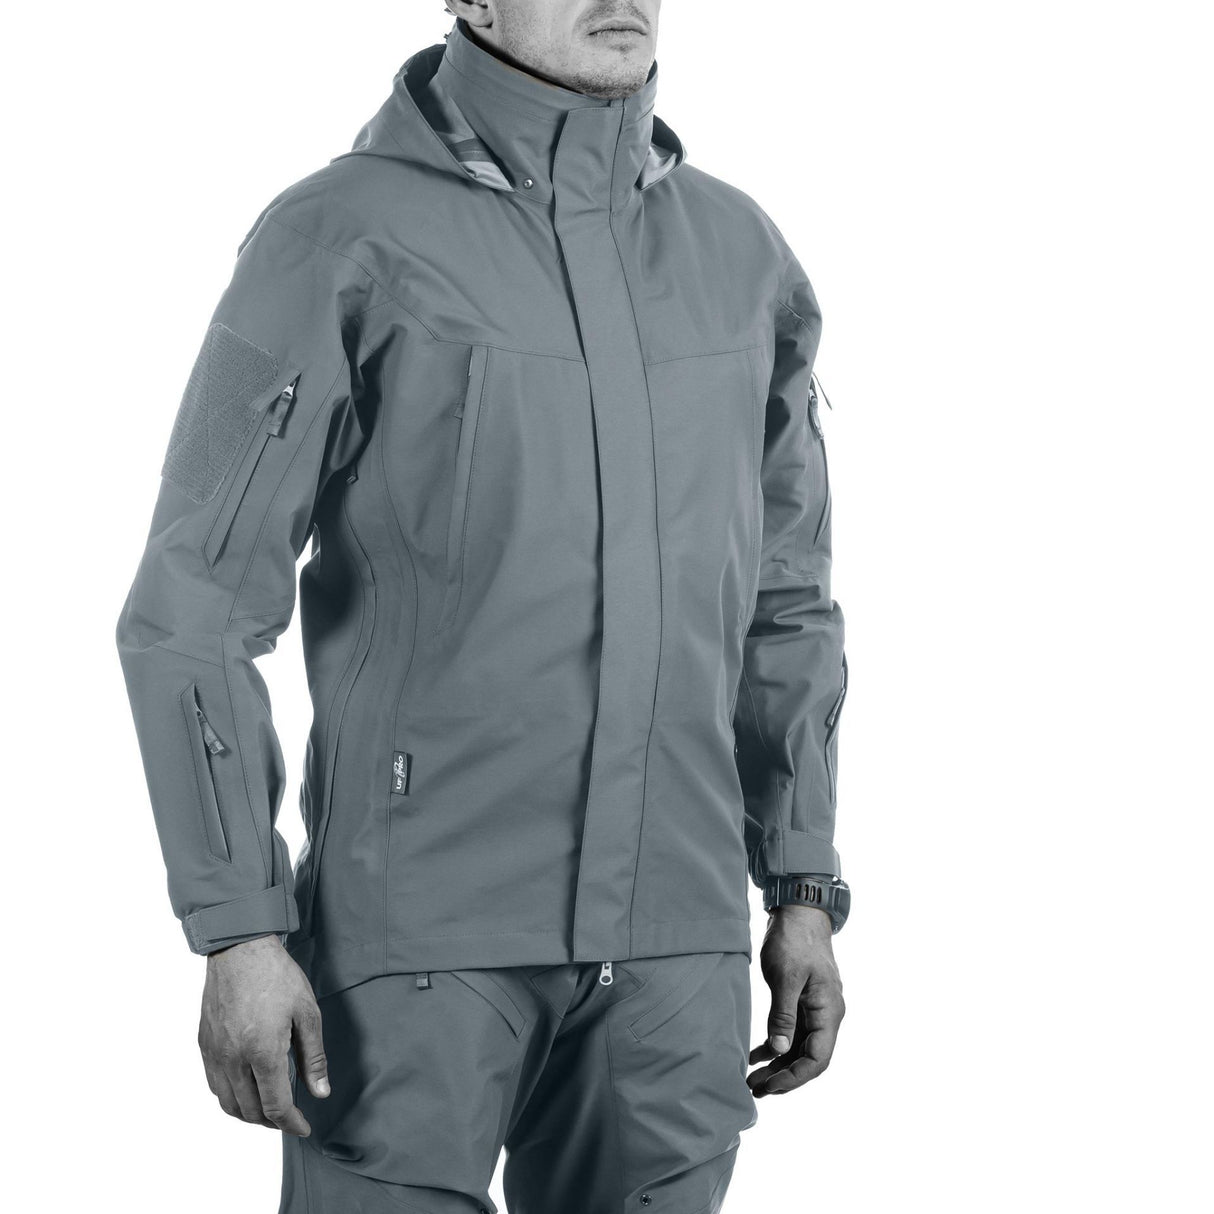 Triple-layer waterproof material keeps you dry and comfortable.